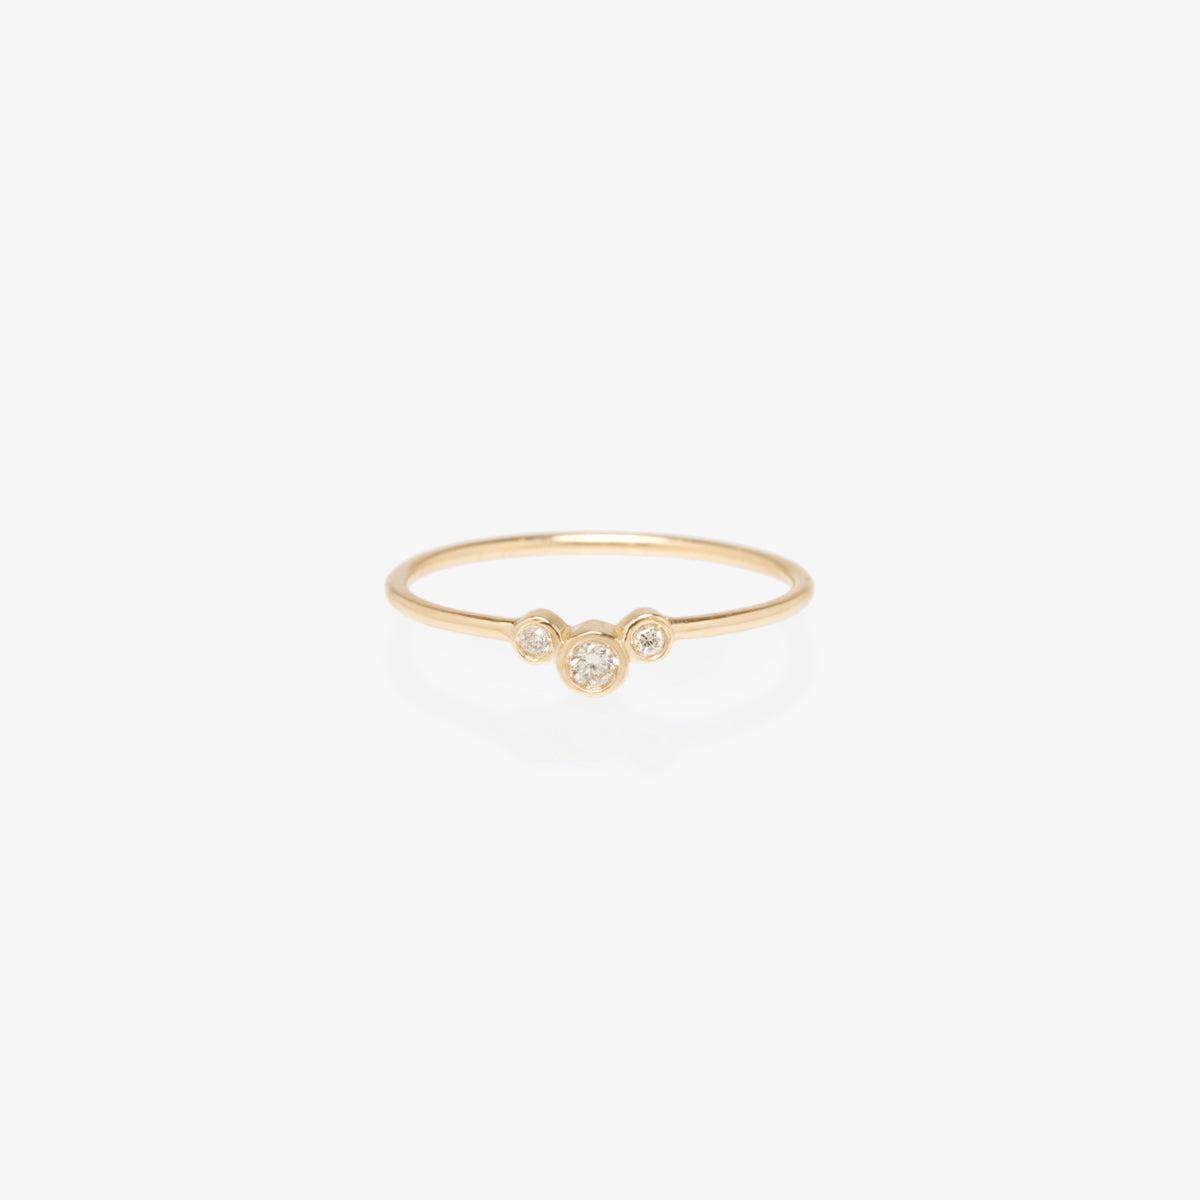 Zoe Chicco 14ct yellow gold 3 diamond curved ring – The Alkemistry